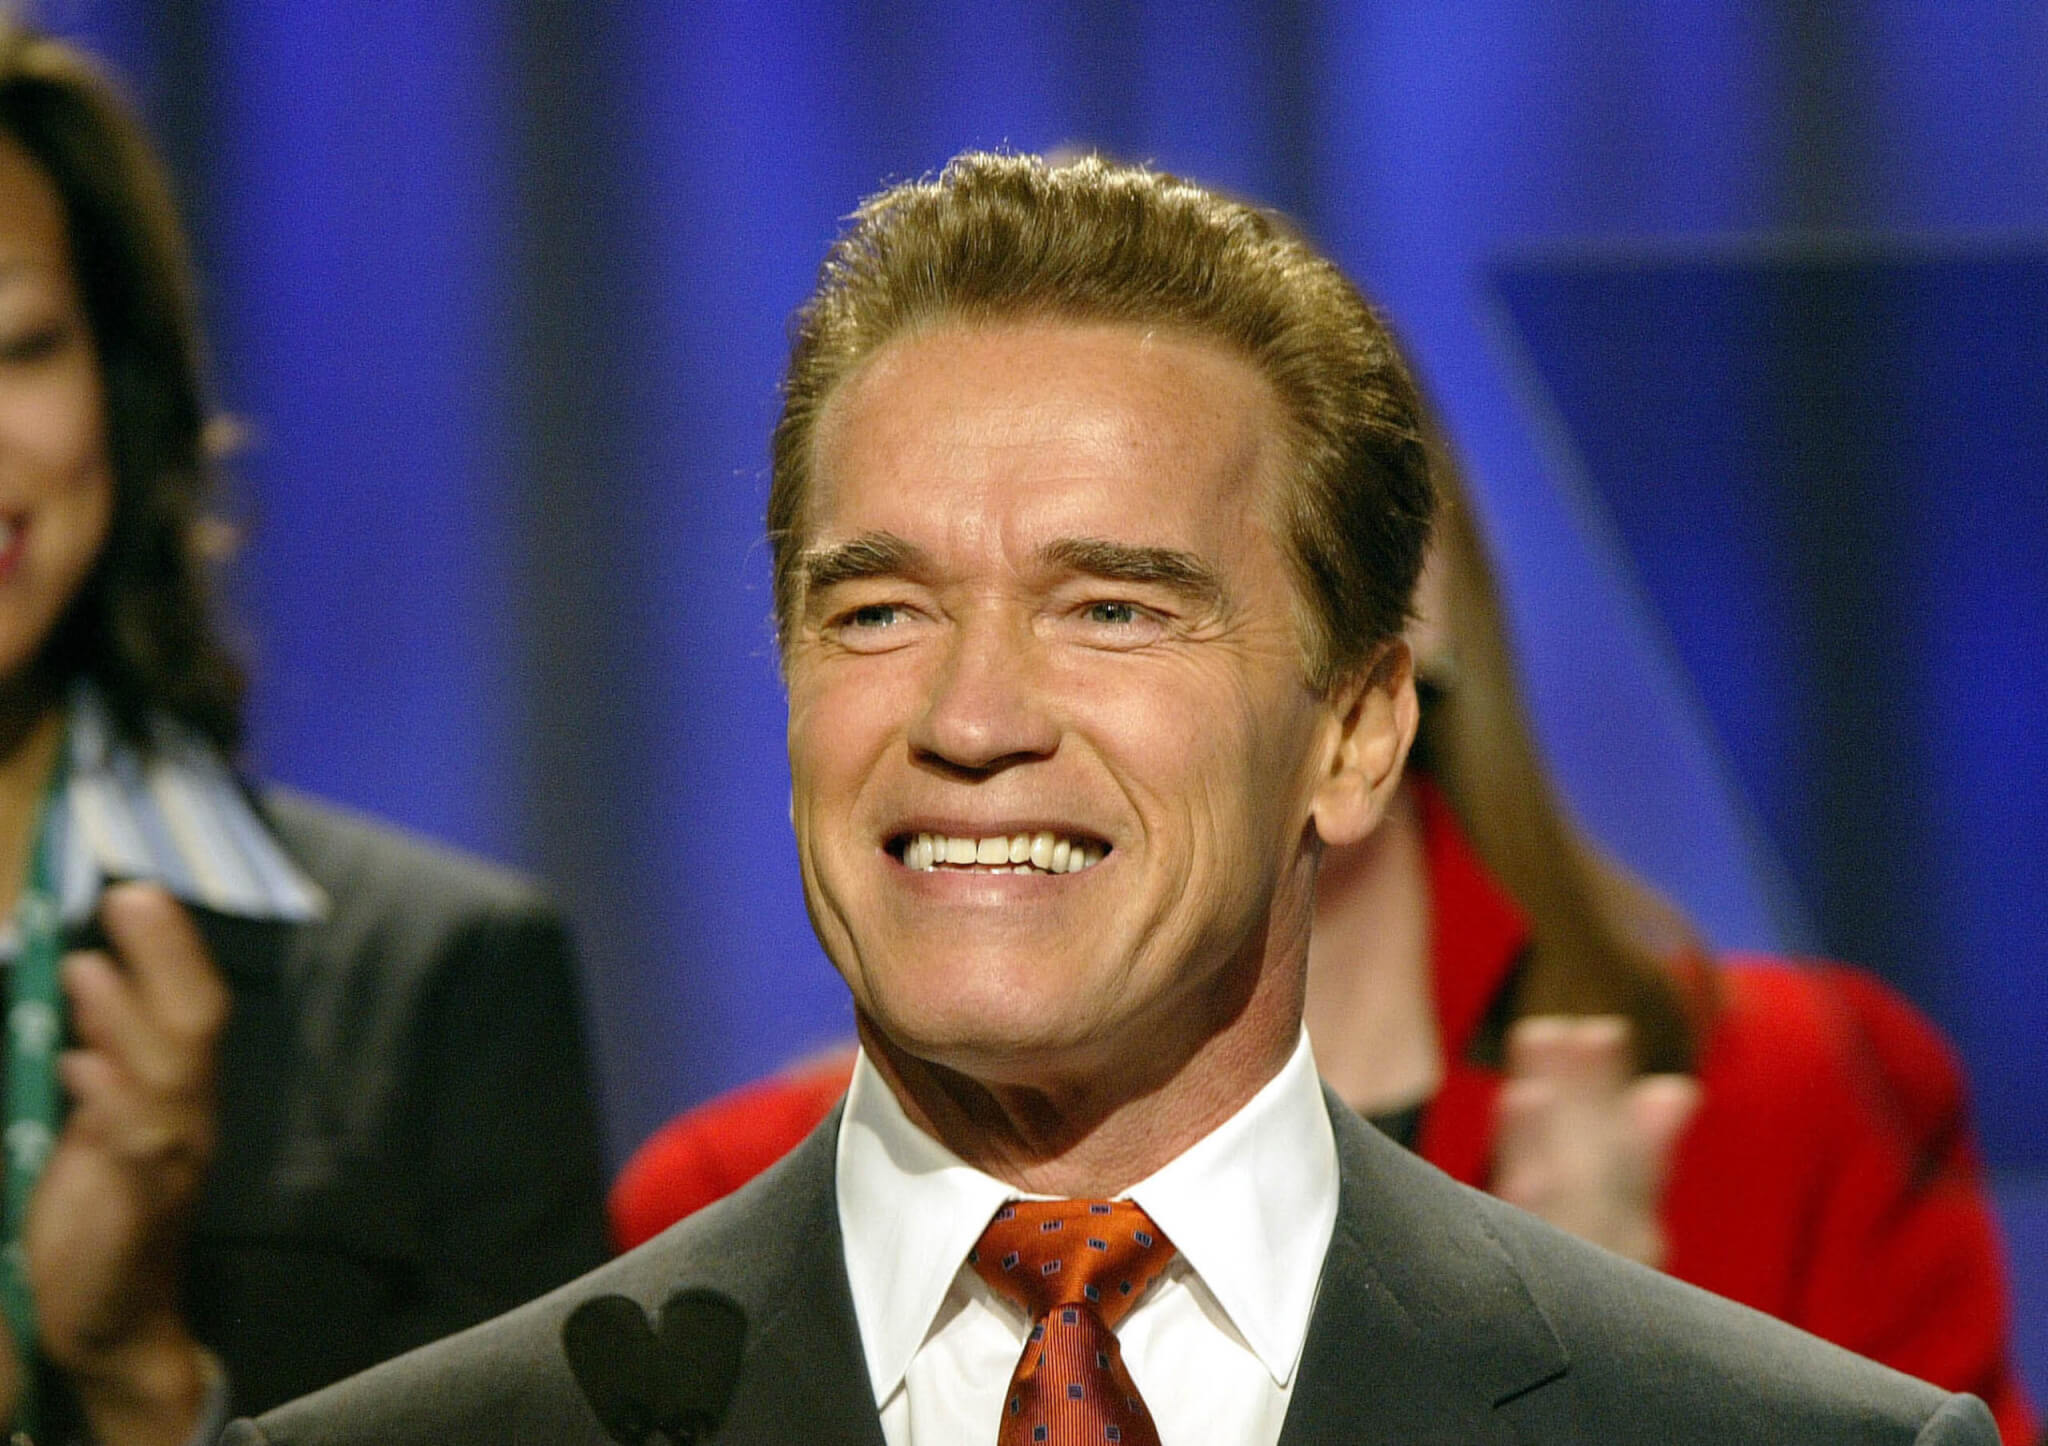 Arnold Schwarzenegger at the California Governor's Conference in 2004